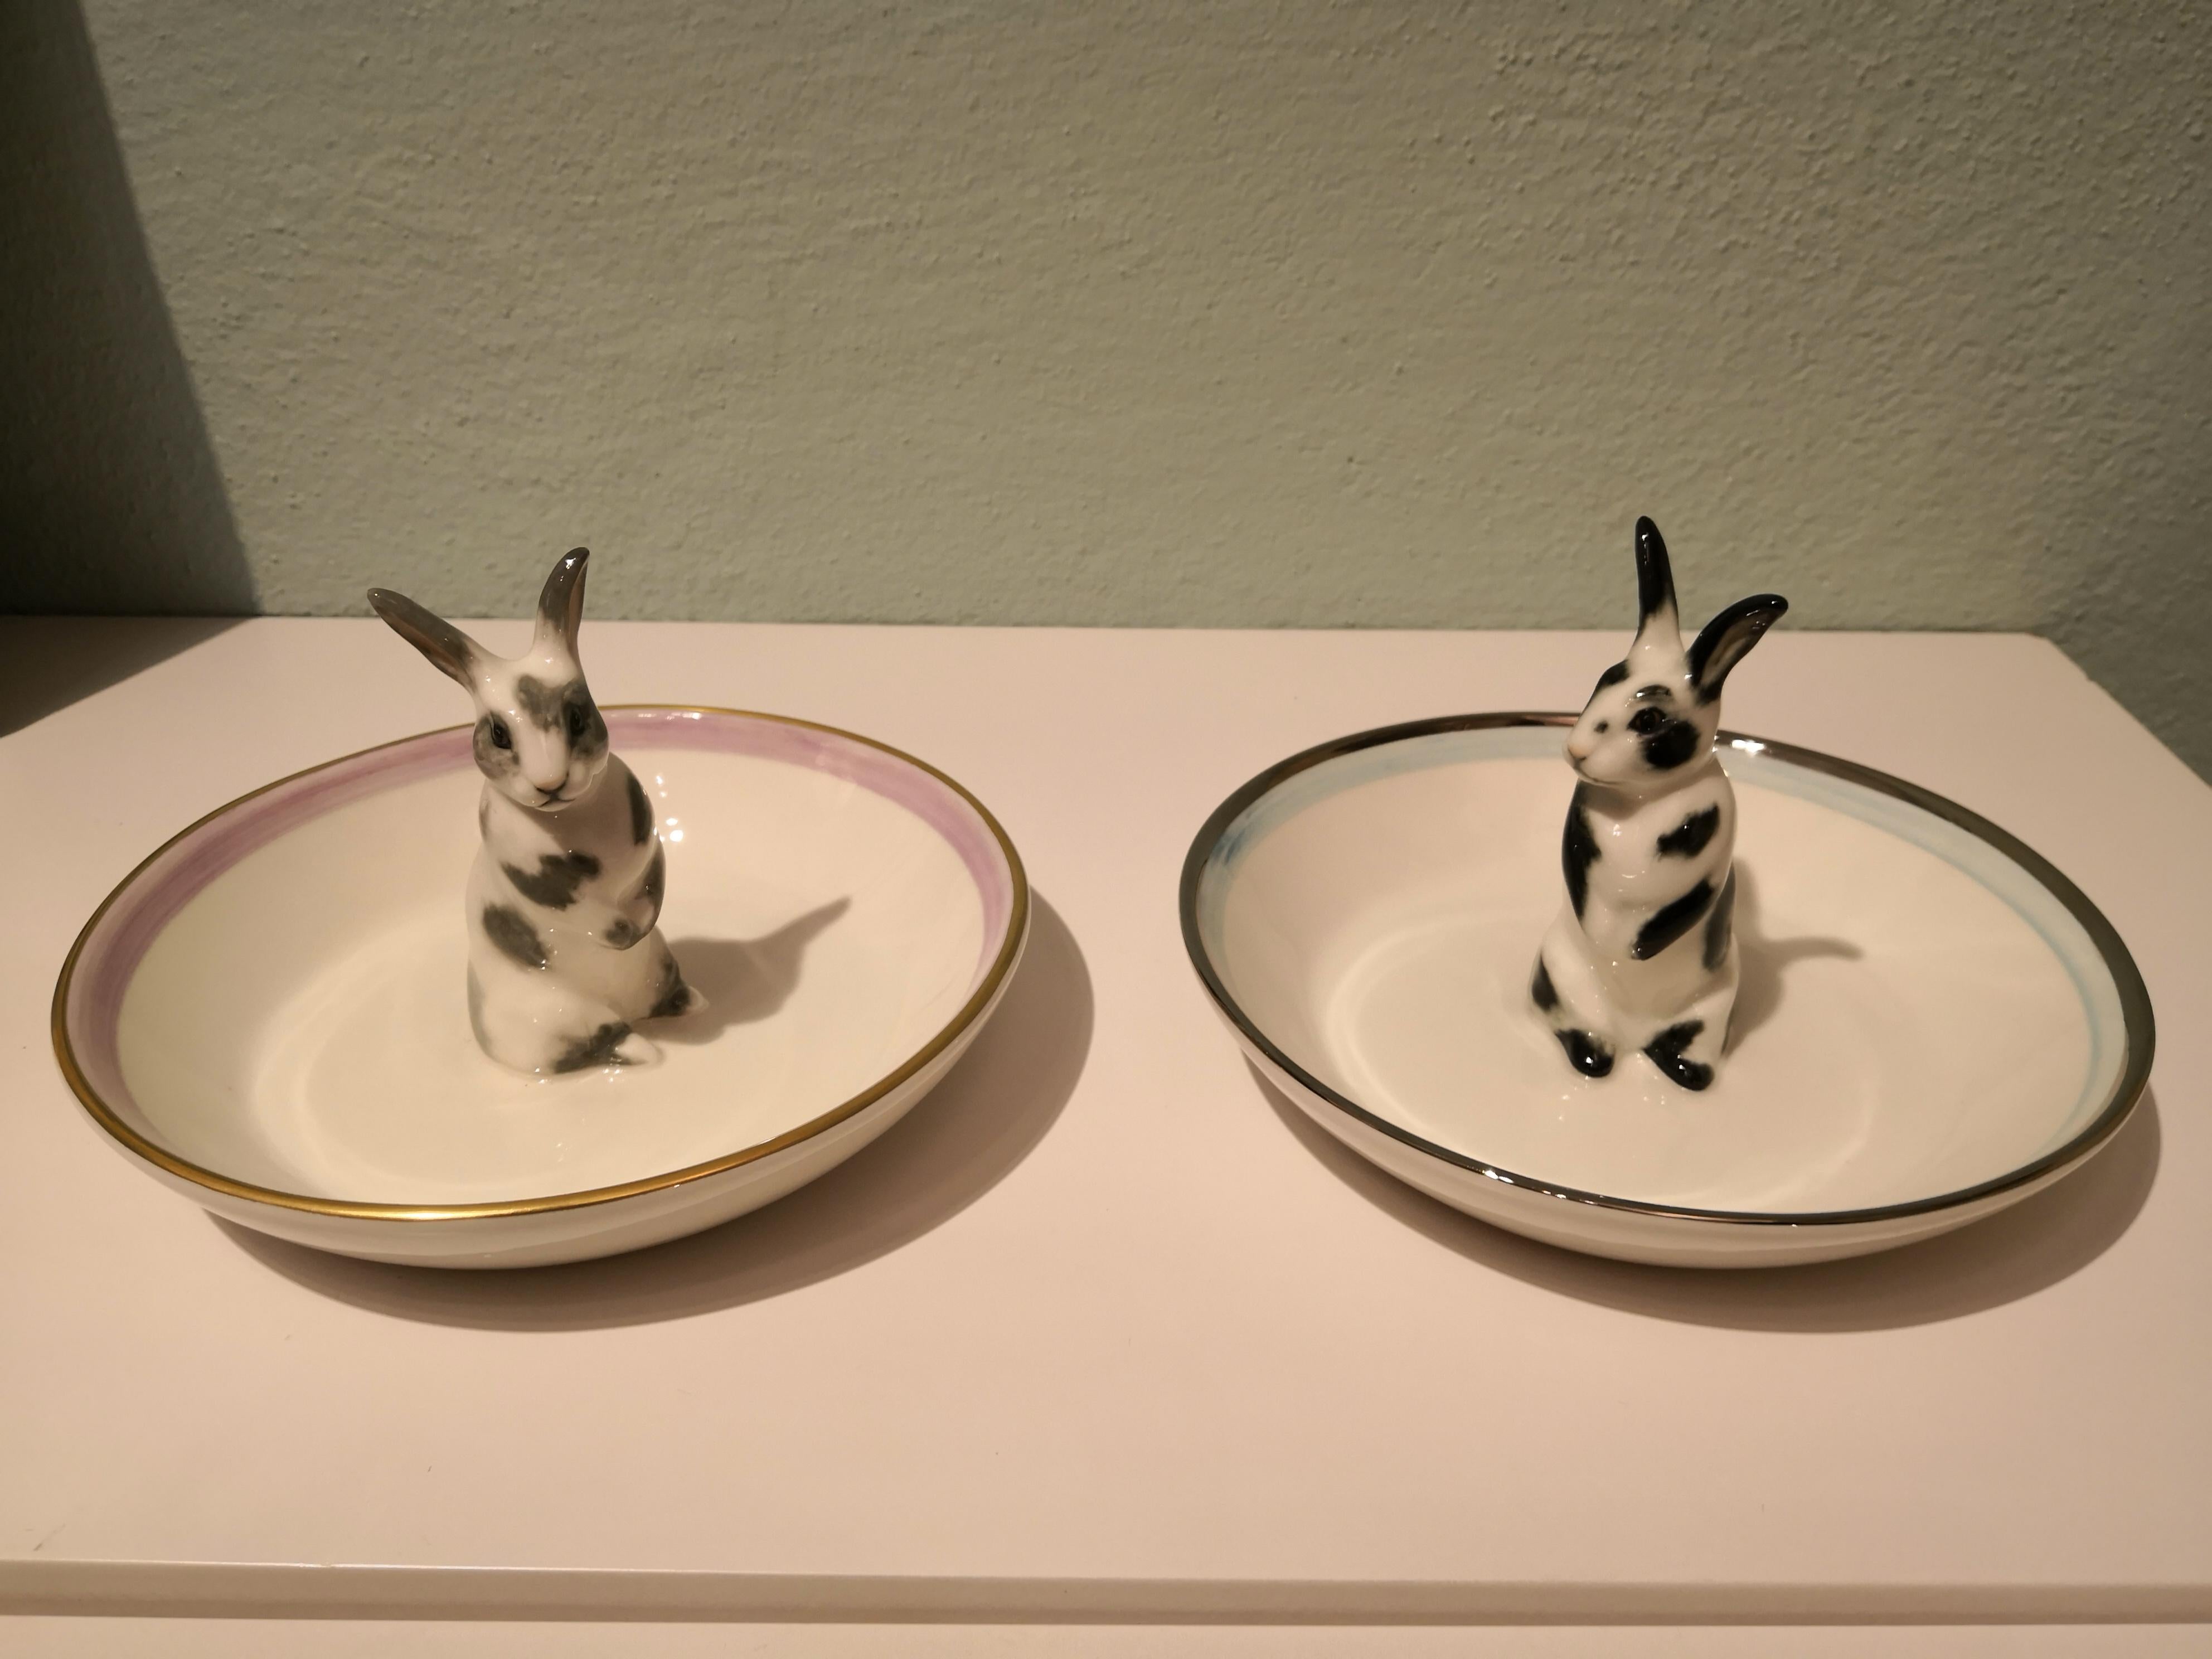 Completely handmade porcelain bowl with a hands-free naturalistic painted hare figure with black spots. The Easter bunny is sitting in the middle of the bowl for decorating nuts or sweets around. Rimmed with a pale blue and platinum line. Handmade